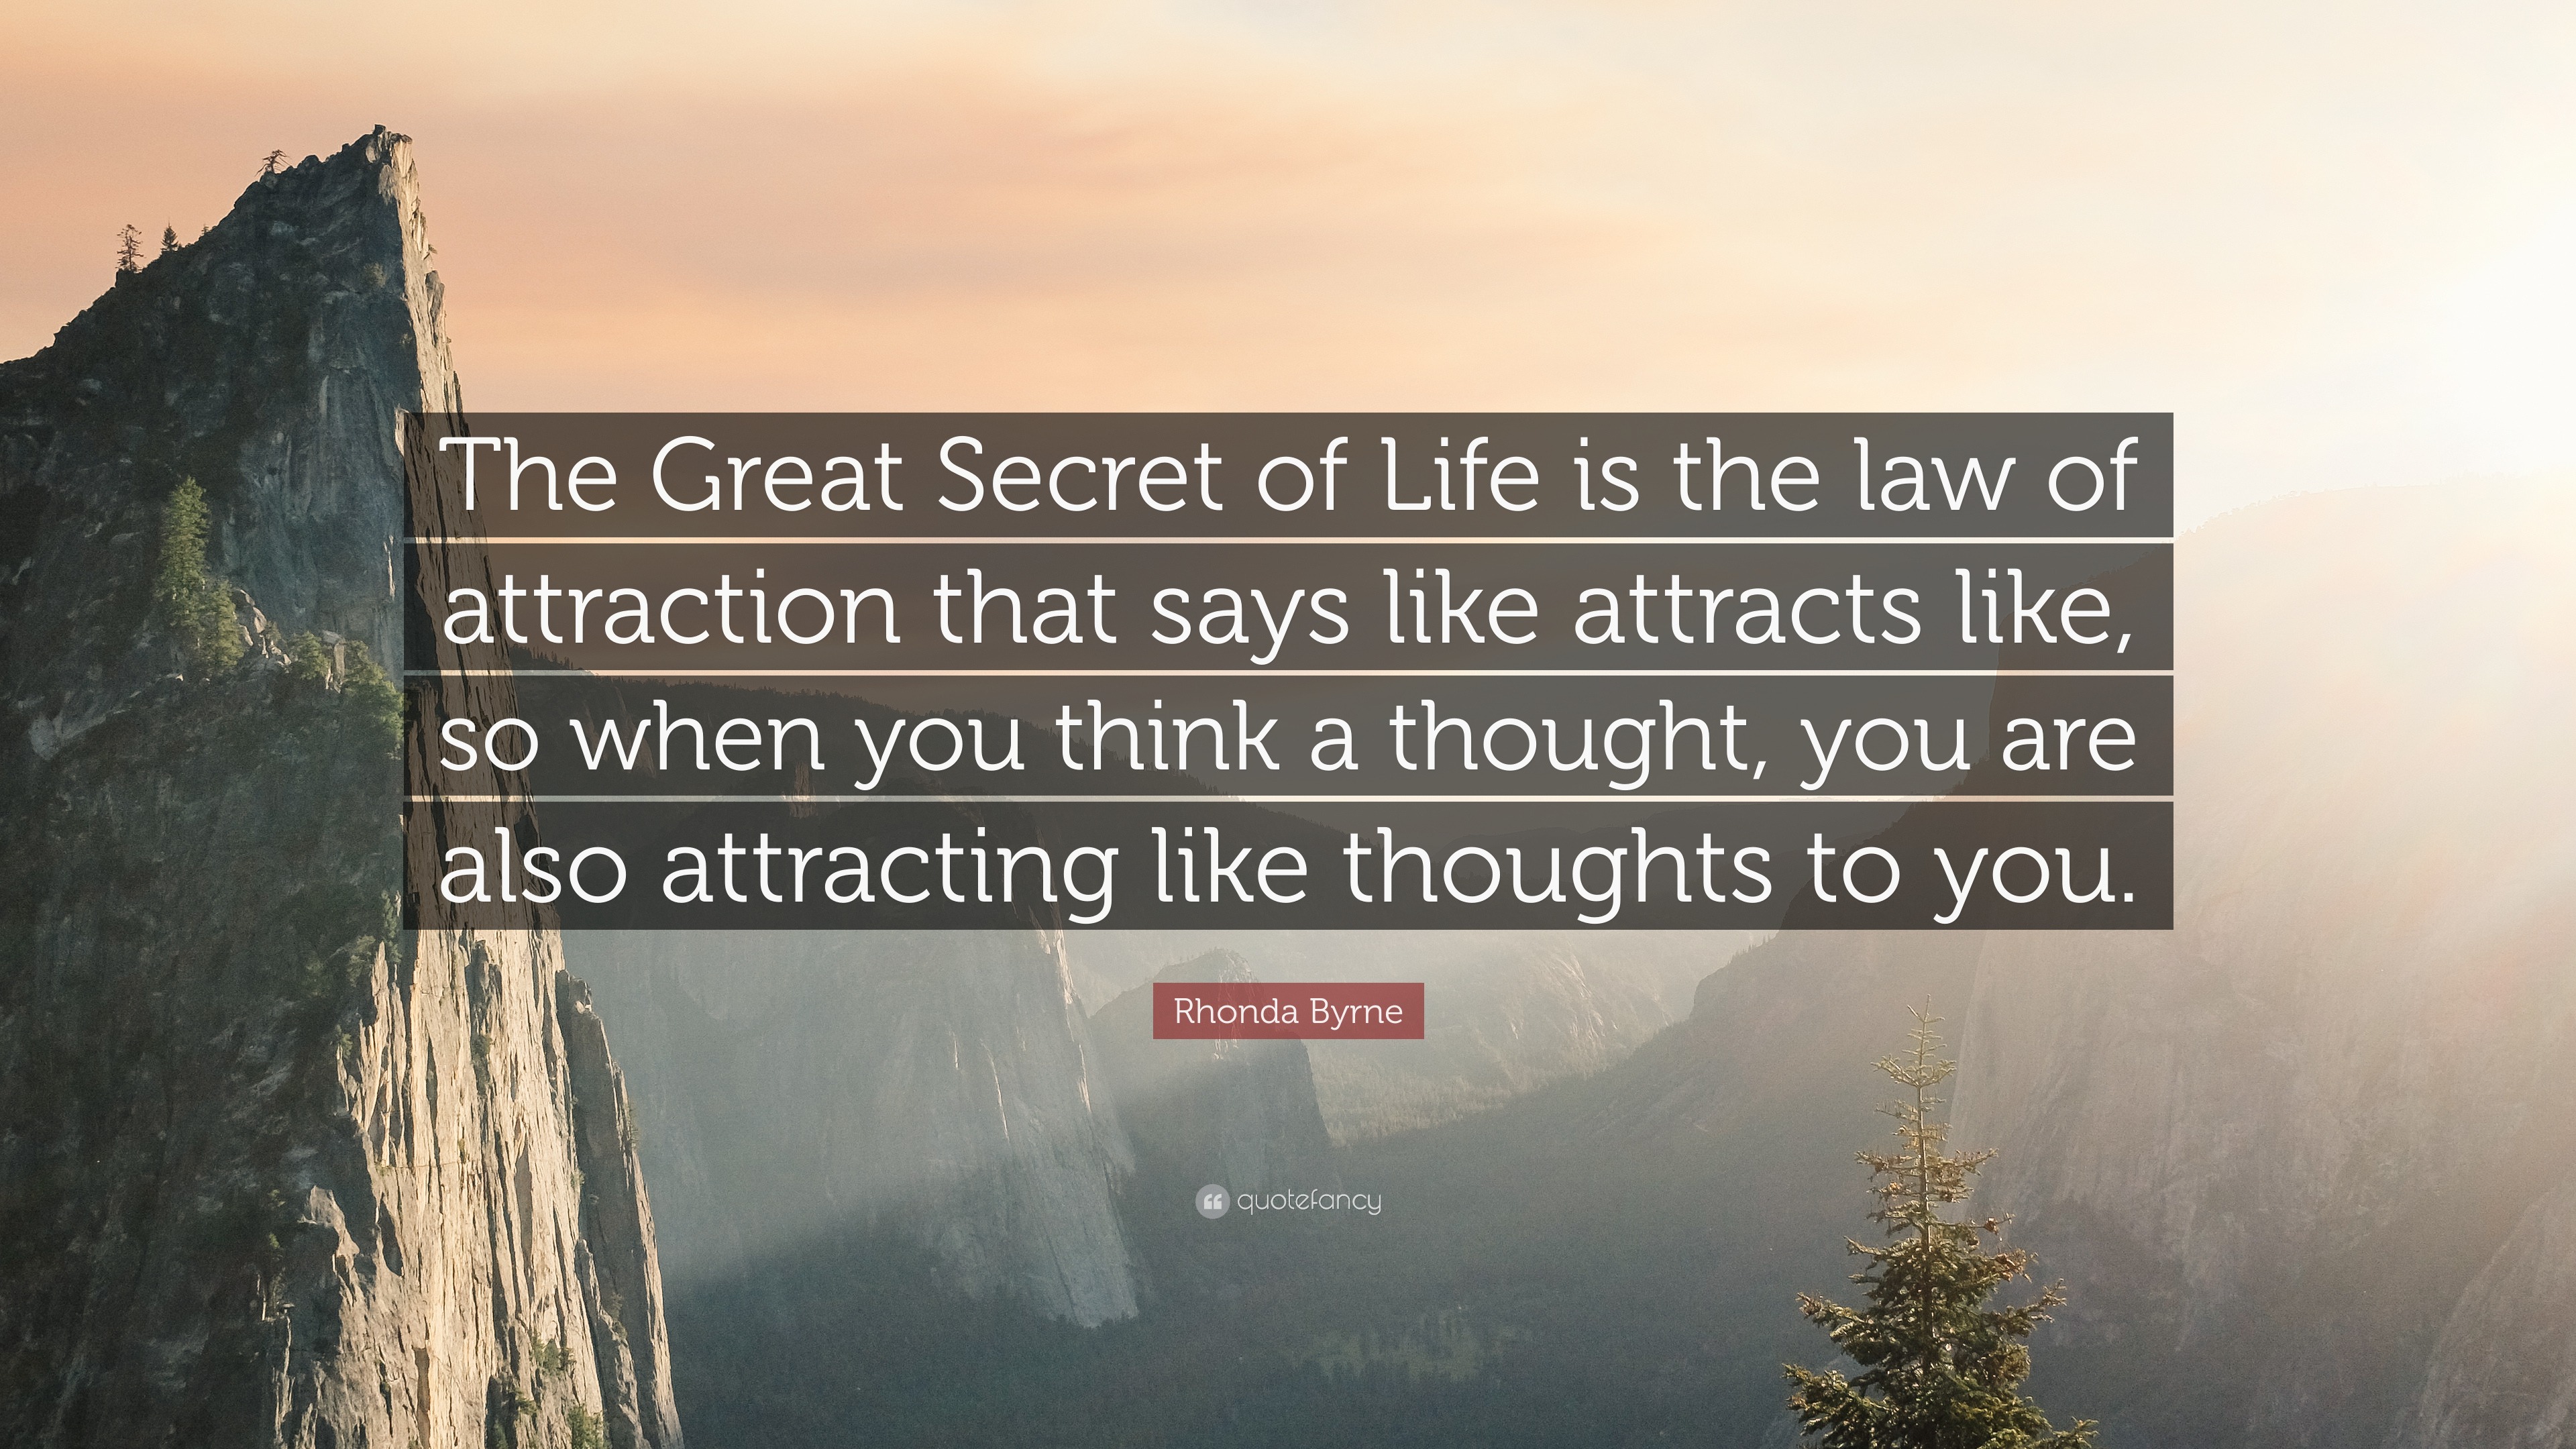 Rhonda Byrne Quote “The Great Secret of Life is the law of attraction that